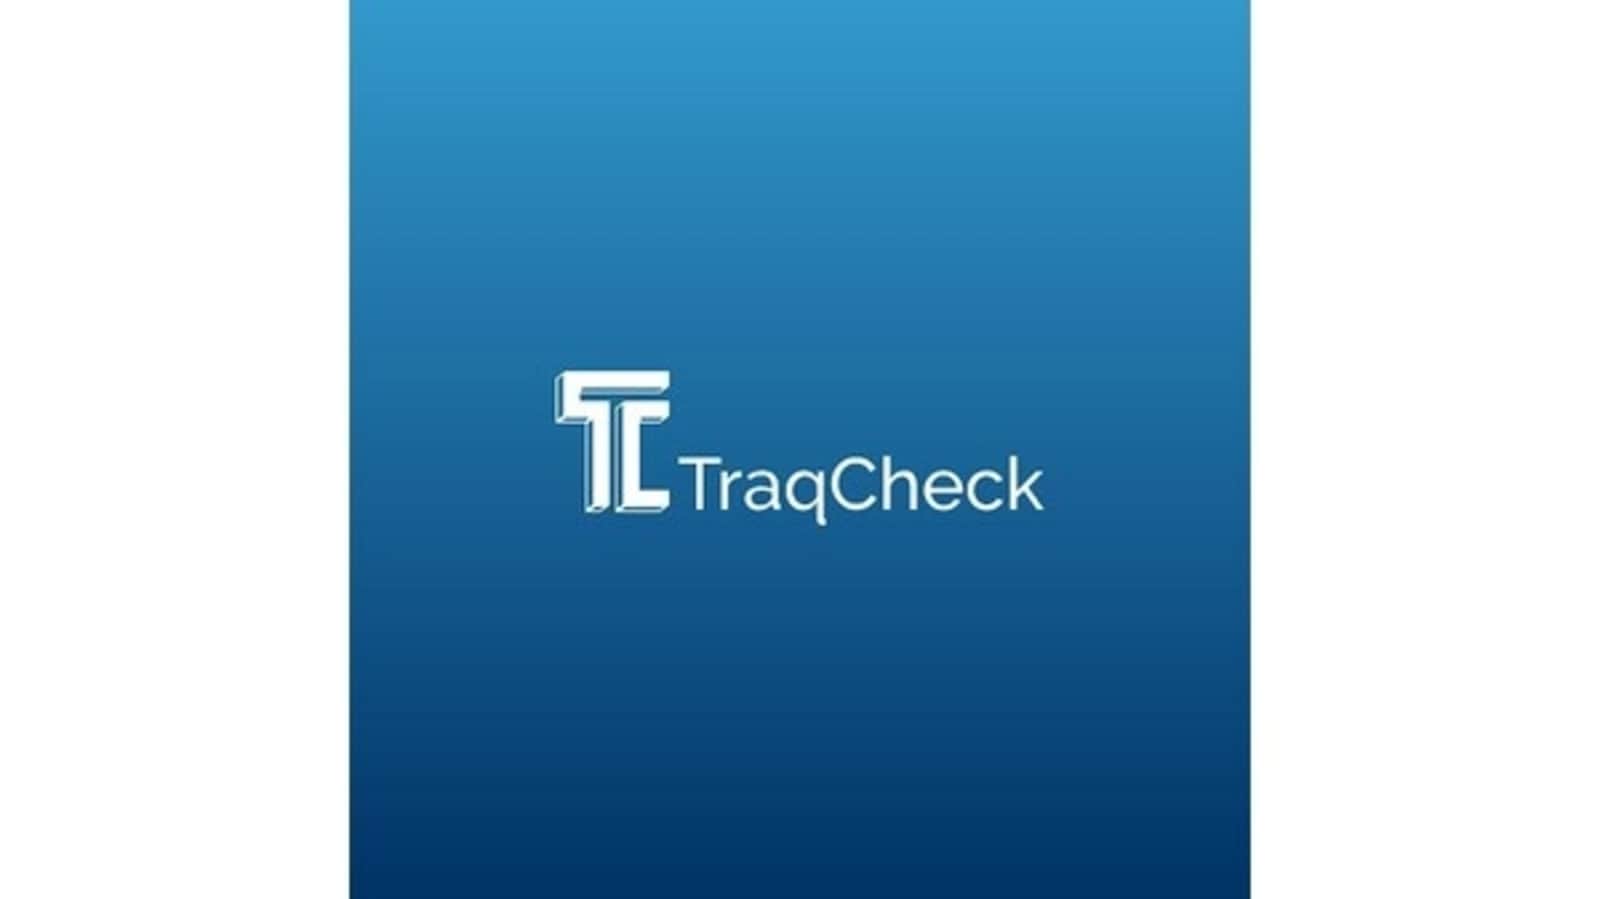 Traqcheck: A new Indian Startup finding traction with leading companies. -  Hindustan Times